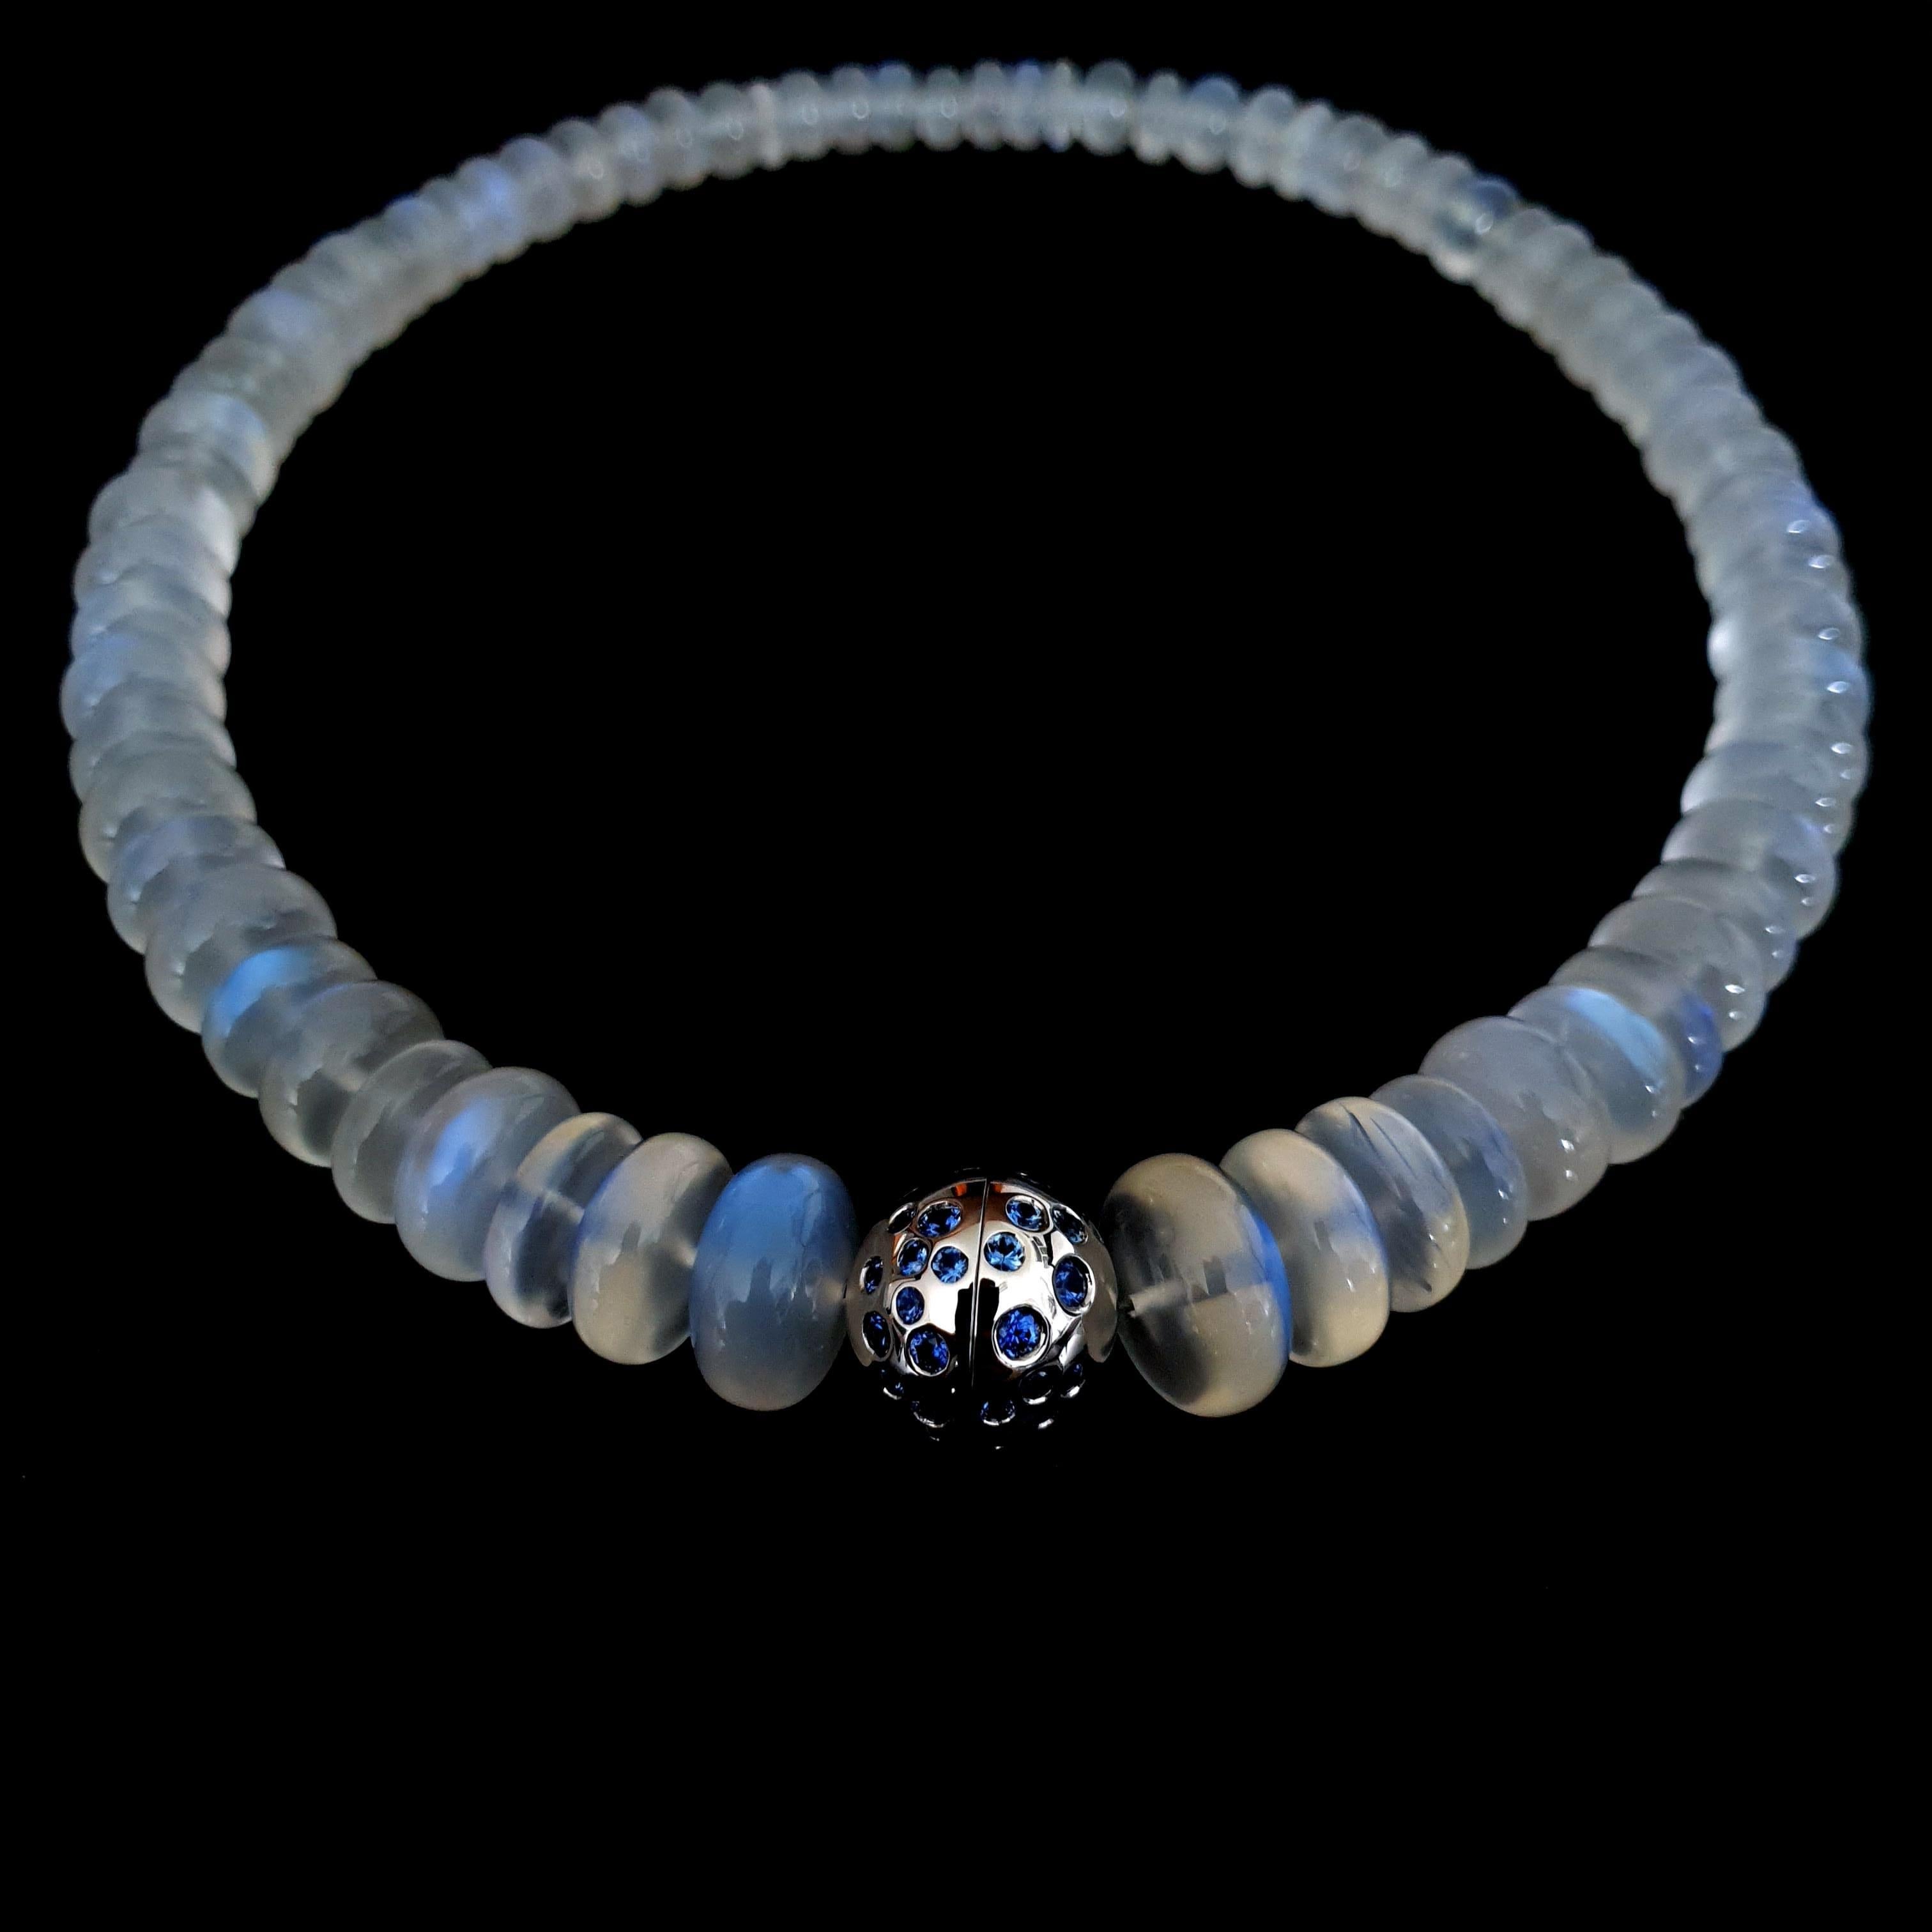 Blue Moonstone Rondel Beaded Necklace with 18 Carat White Gold Sapphire Clasp For Sale 2